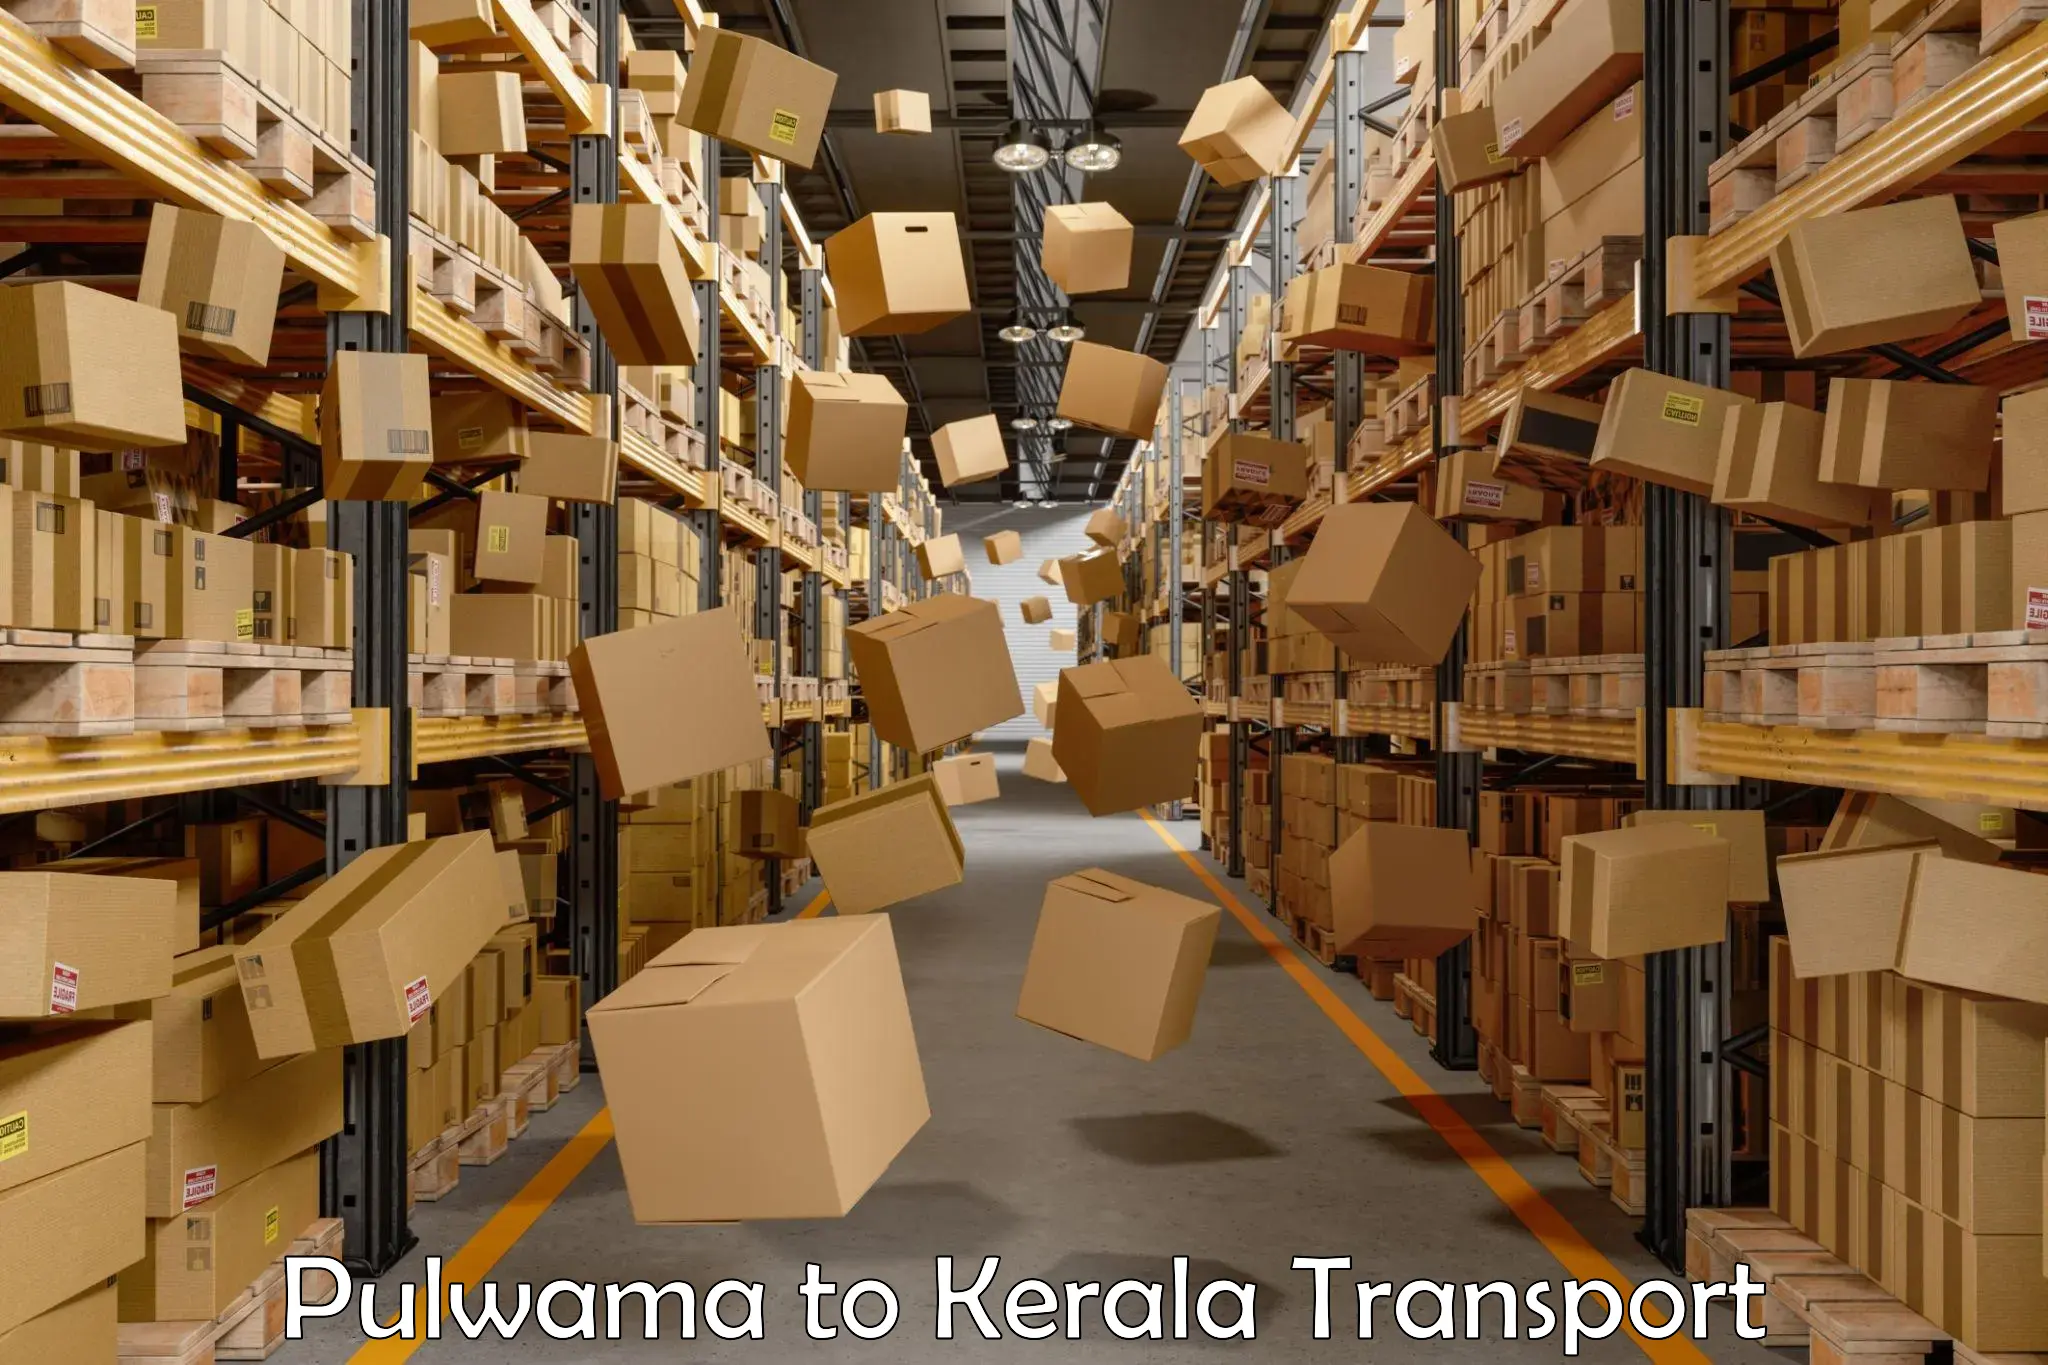 Container transport service Pulwama to Kerala